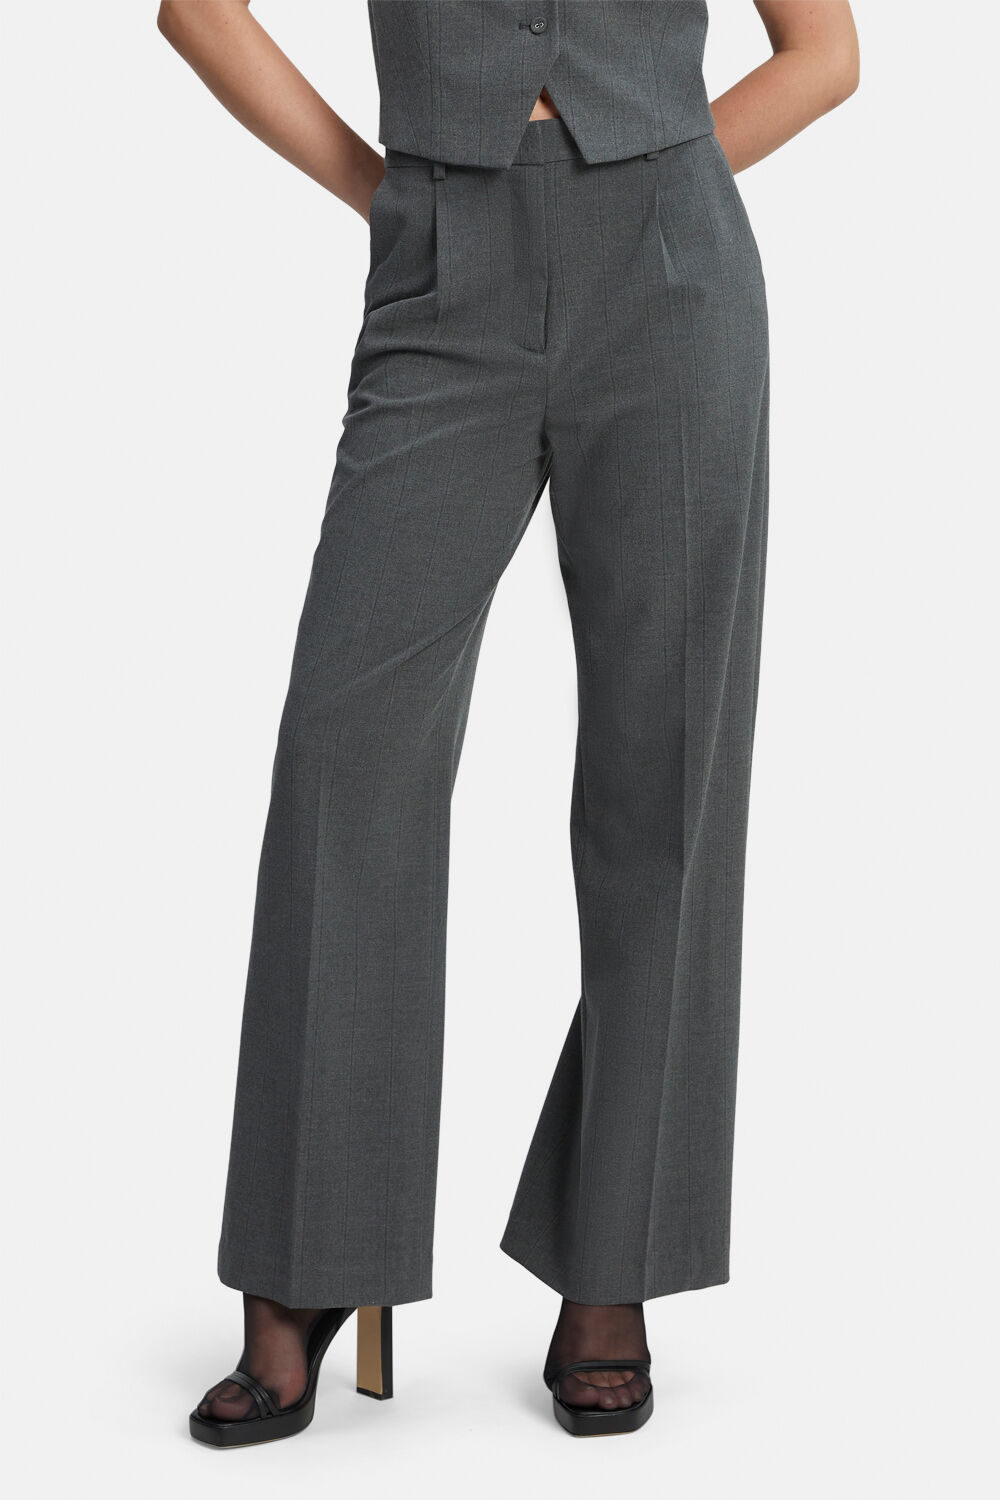 PIN STRIPE STRAIGHT PANT in colour FROST GRAY